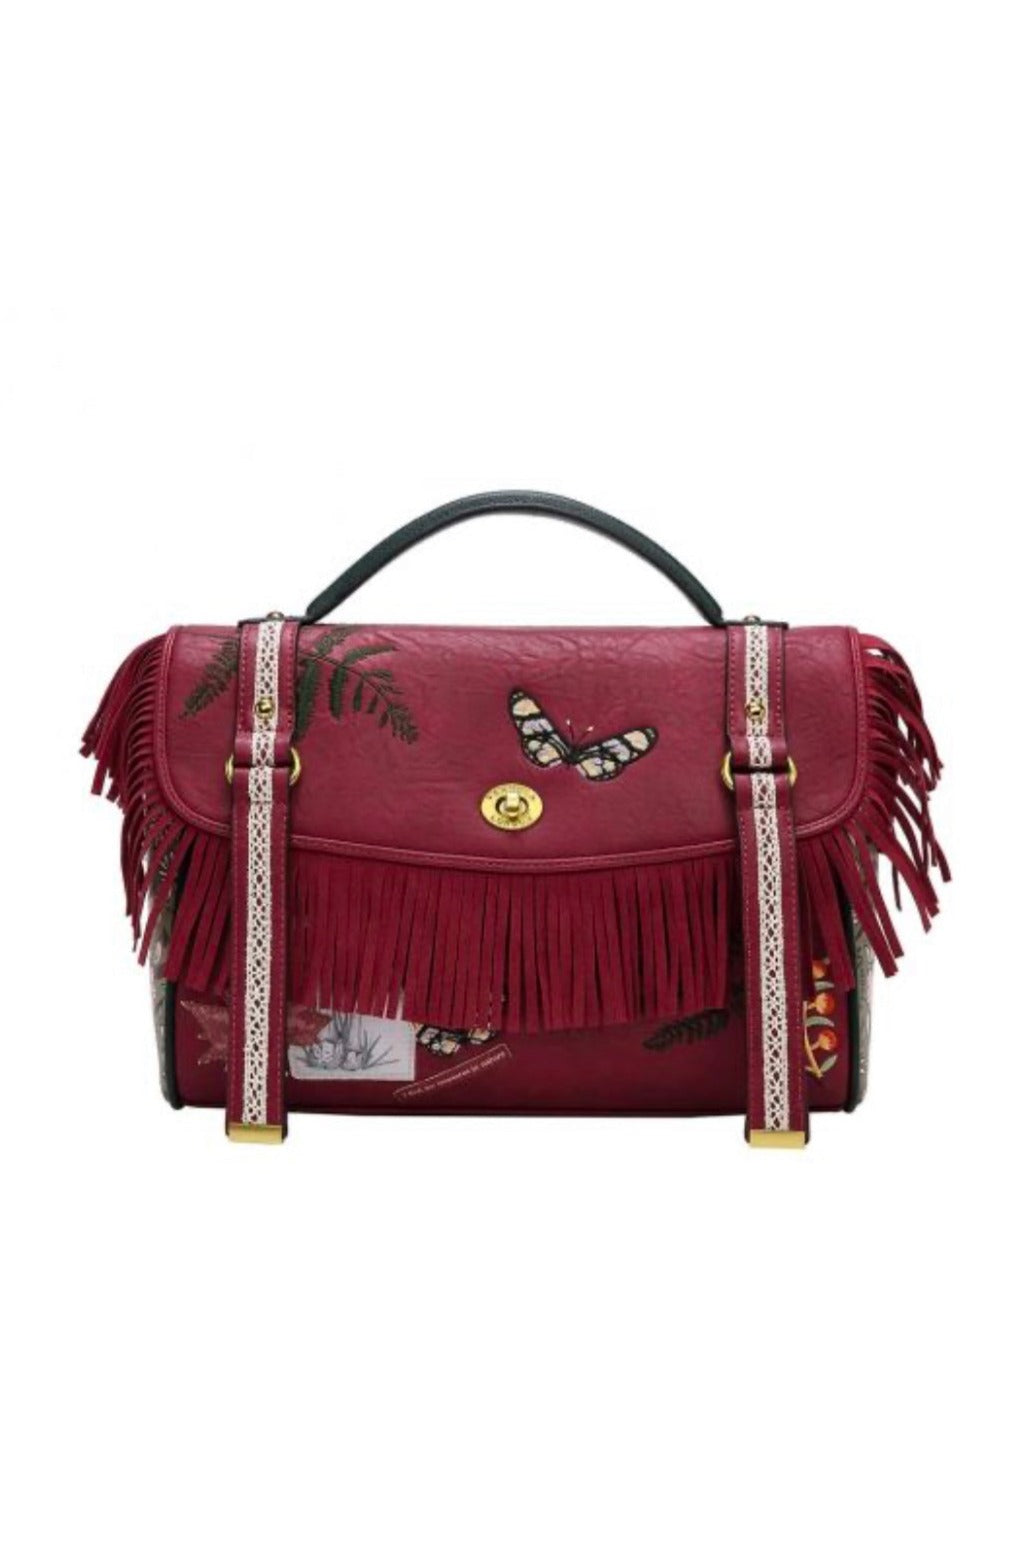 Fringe benefits: The bohemian bag trend is back for 2017 | The Independent  | The Independent